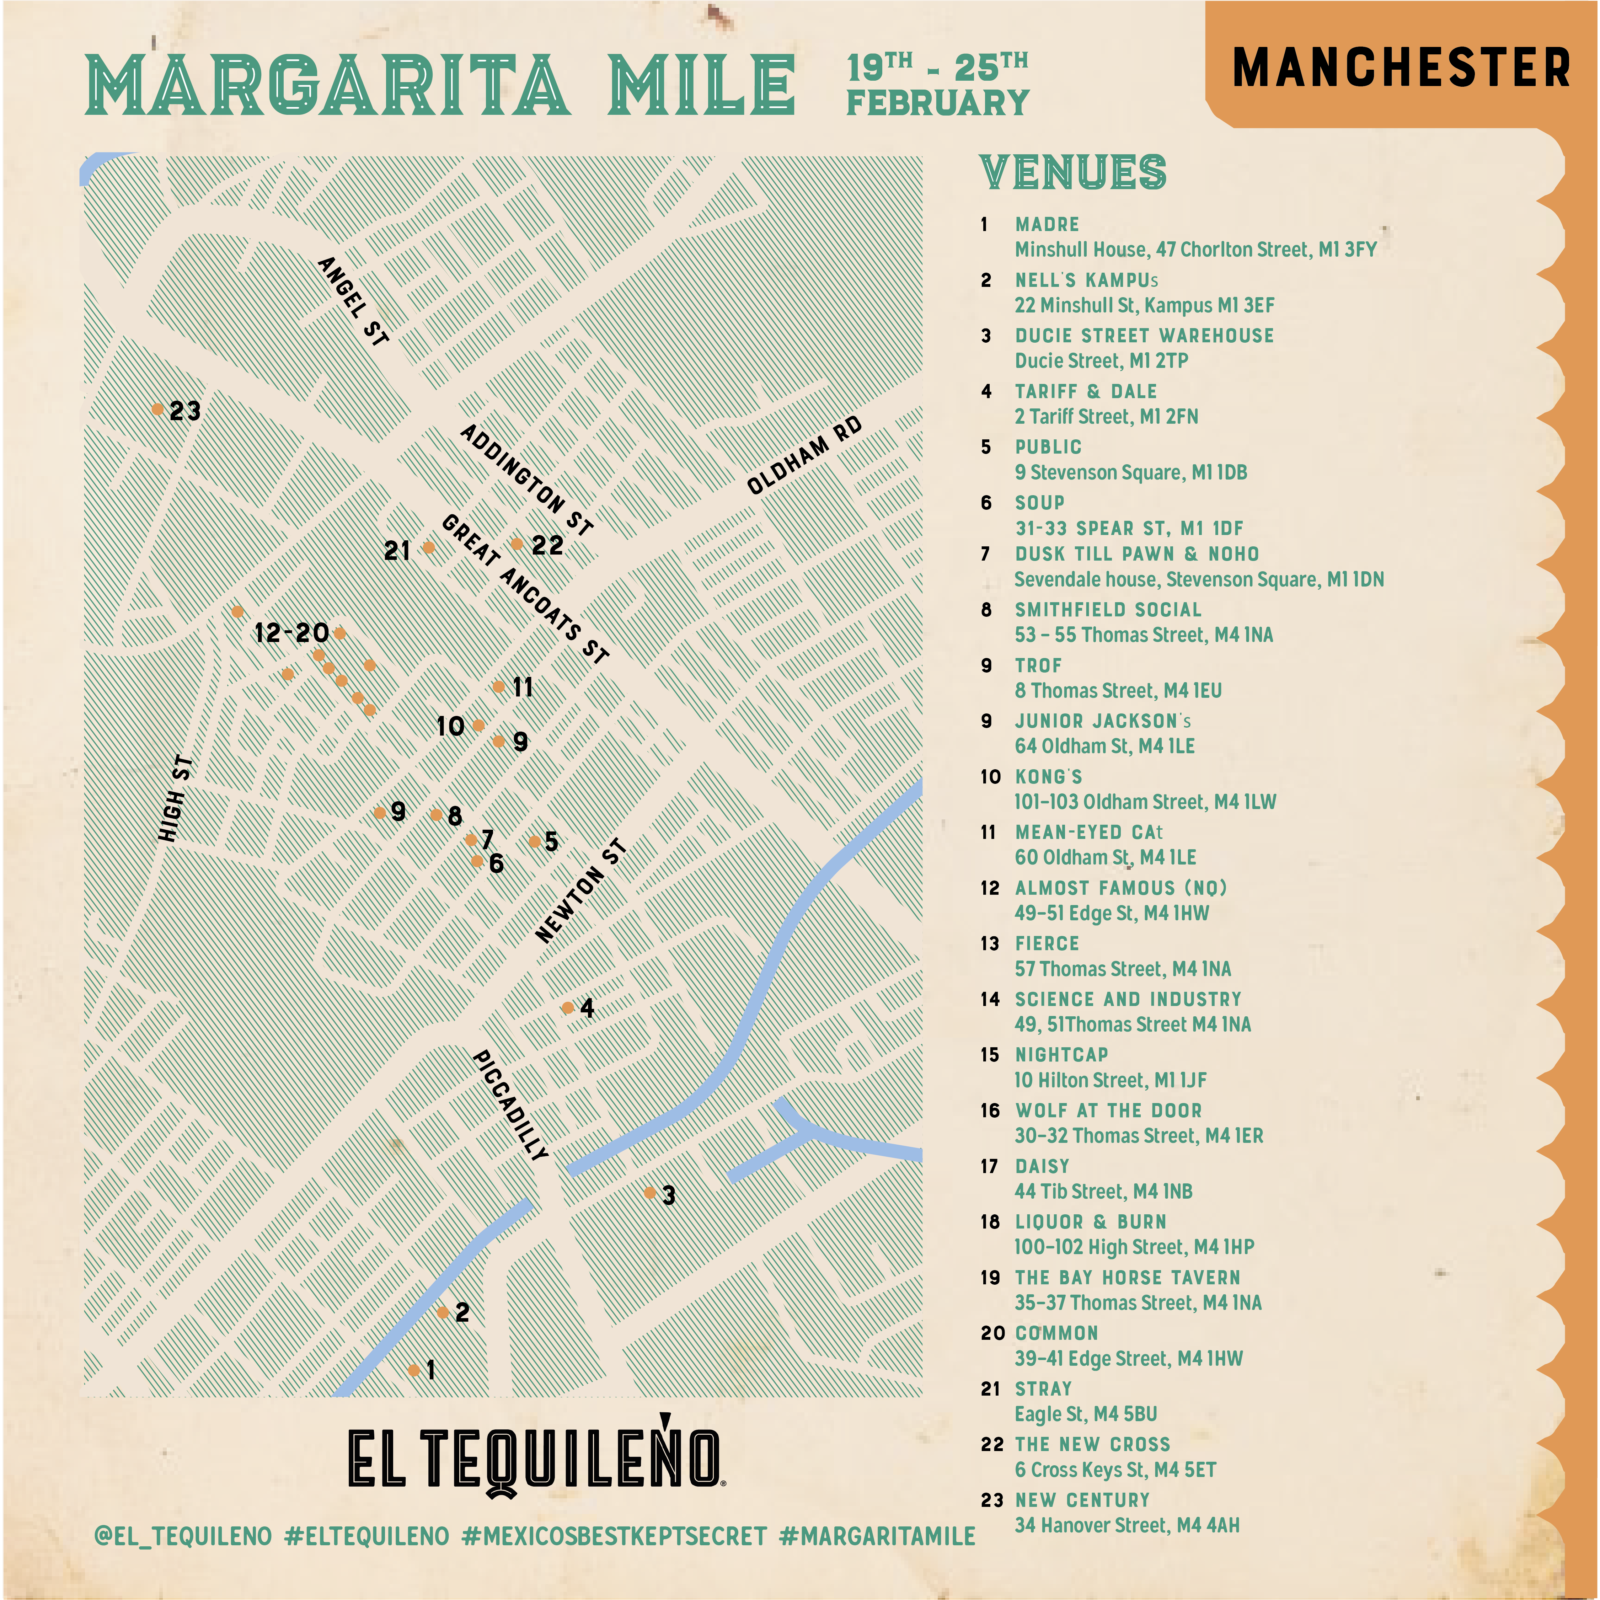 The map of the Margarita Mile in Manchester